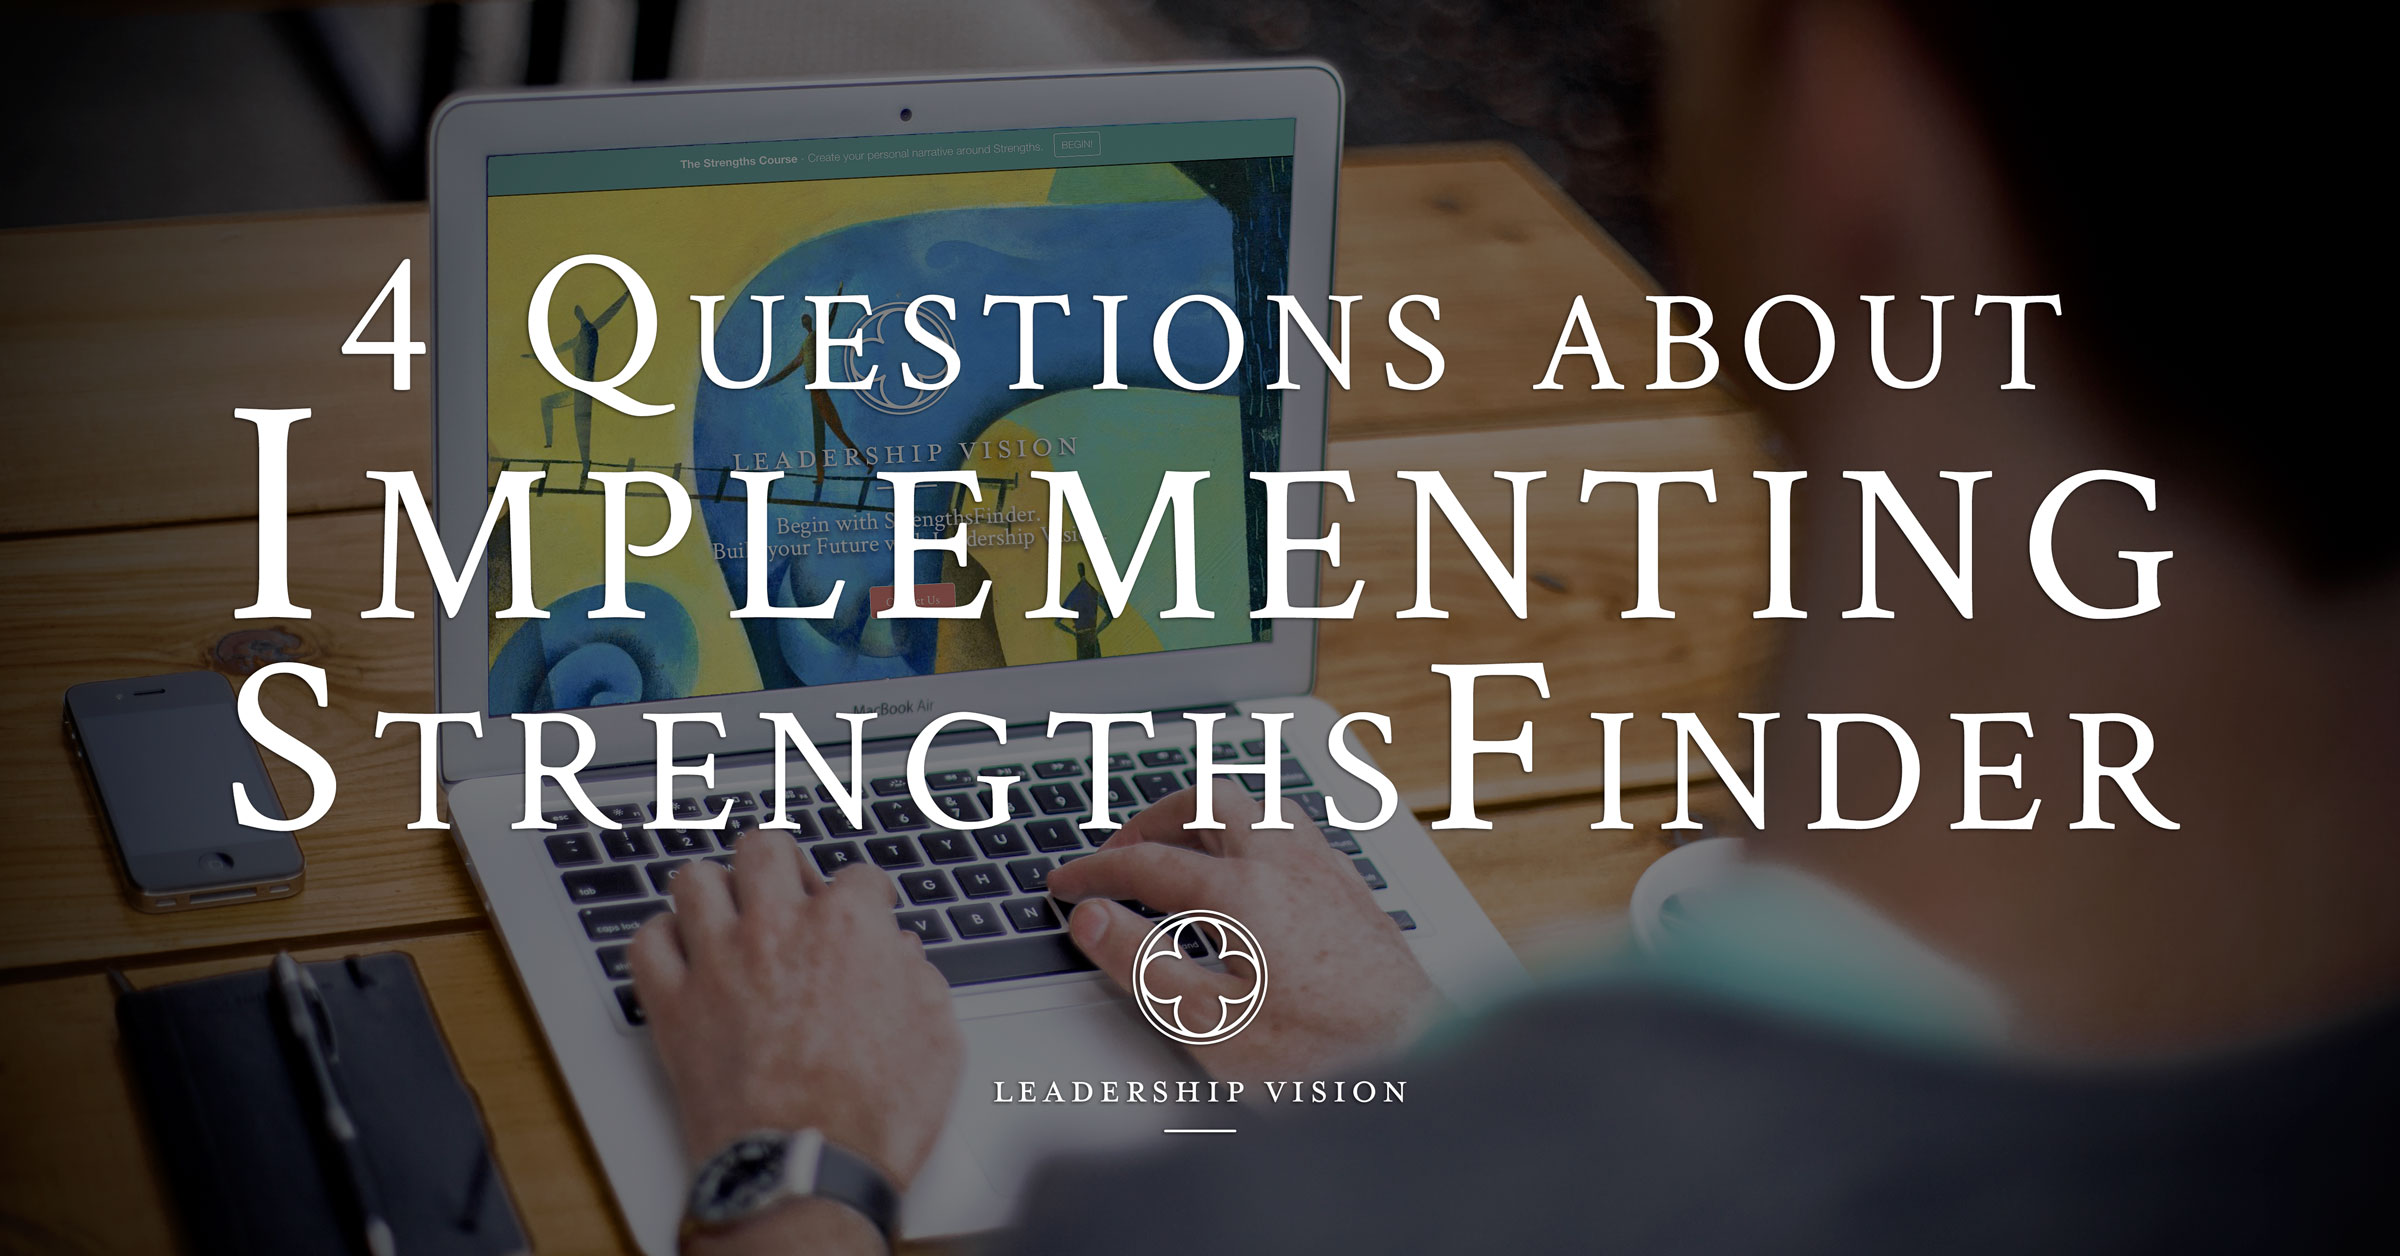 4 questions about StrengthsFinder featured